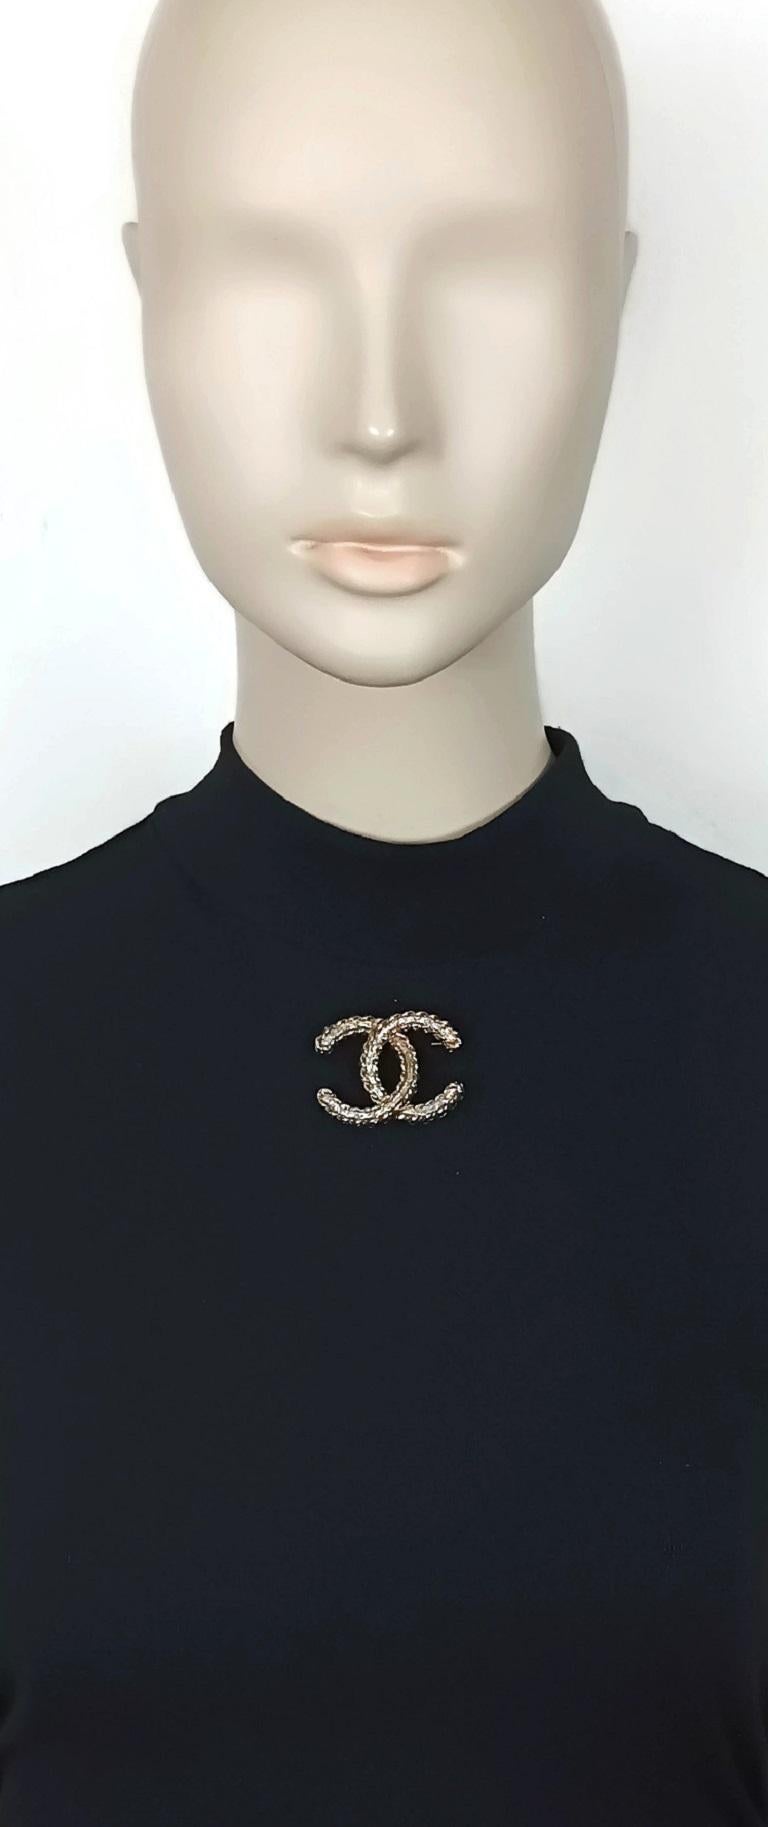 CHANEL by KARL LAGERFELD light gold toned CC logo brooch embellished with holographic resin baguettes and blue crystals.

Embossed CHANEL 17 P Made in France.

Indicative measurements : width approx. 4.2 cm (1.65 inches) / height approx. 3.3 cm